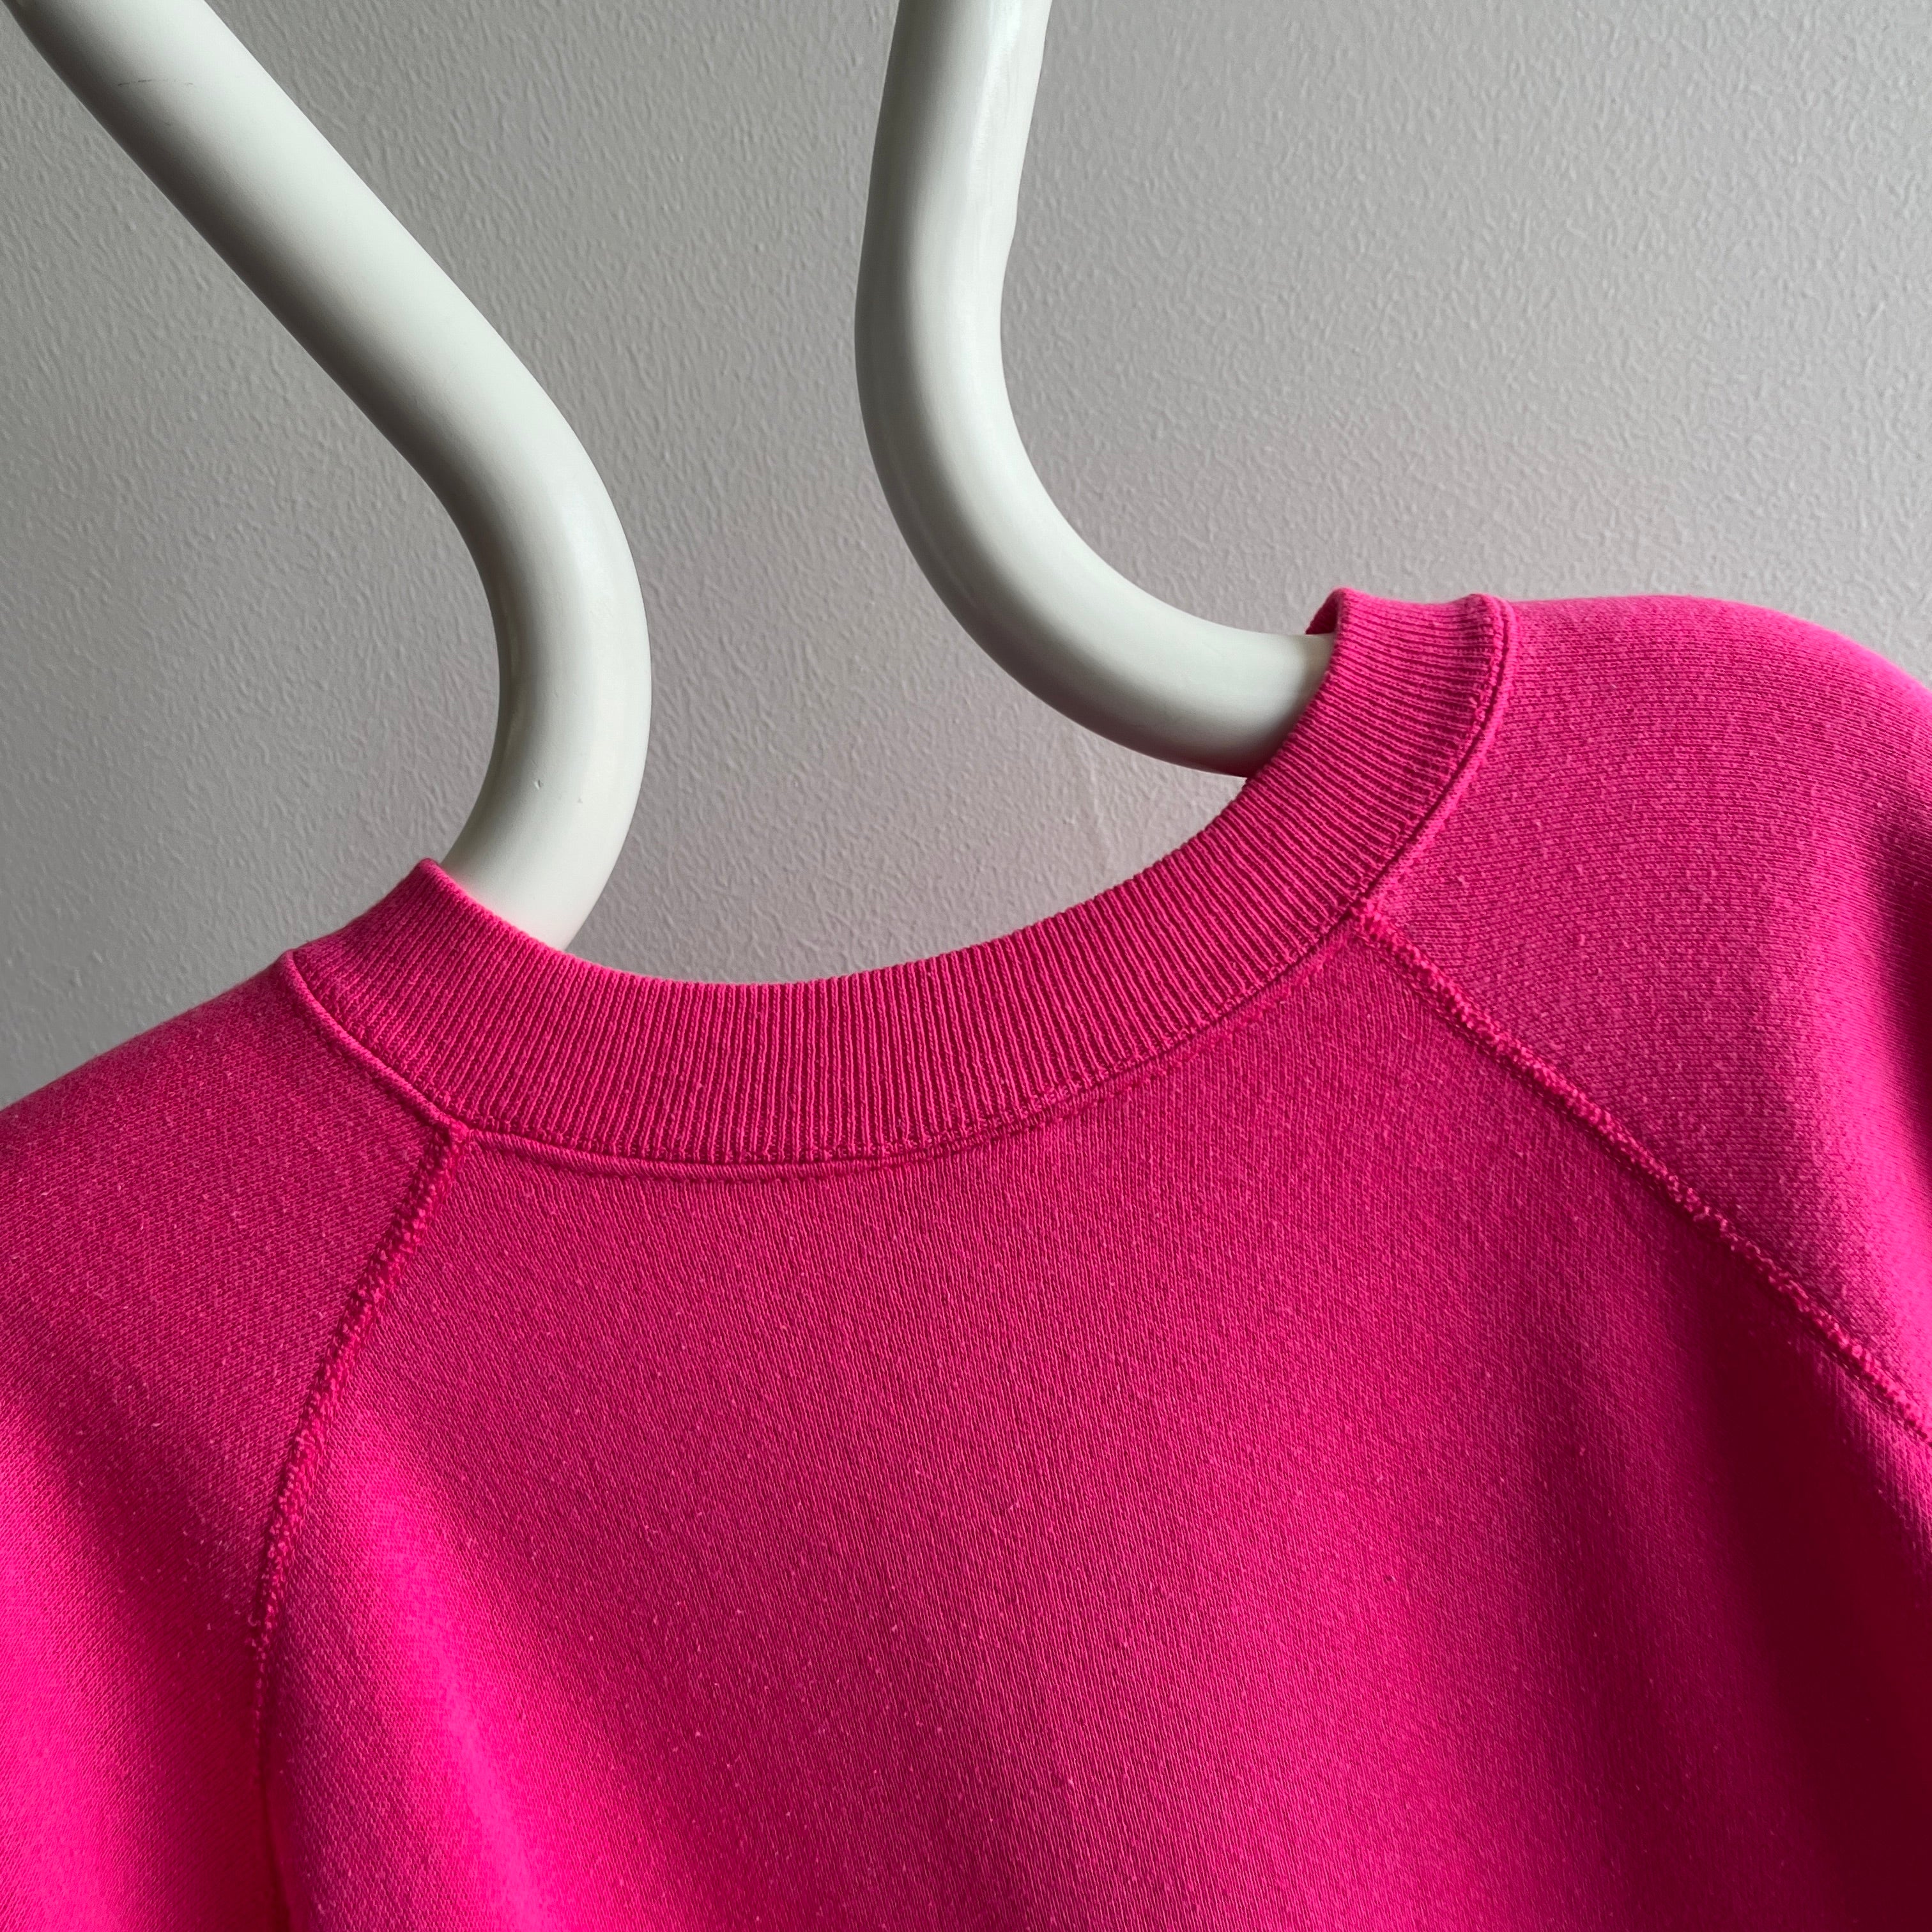 1980s Perfectly Hot Pink Sweatshirt by Pannill (Swoon)